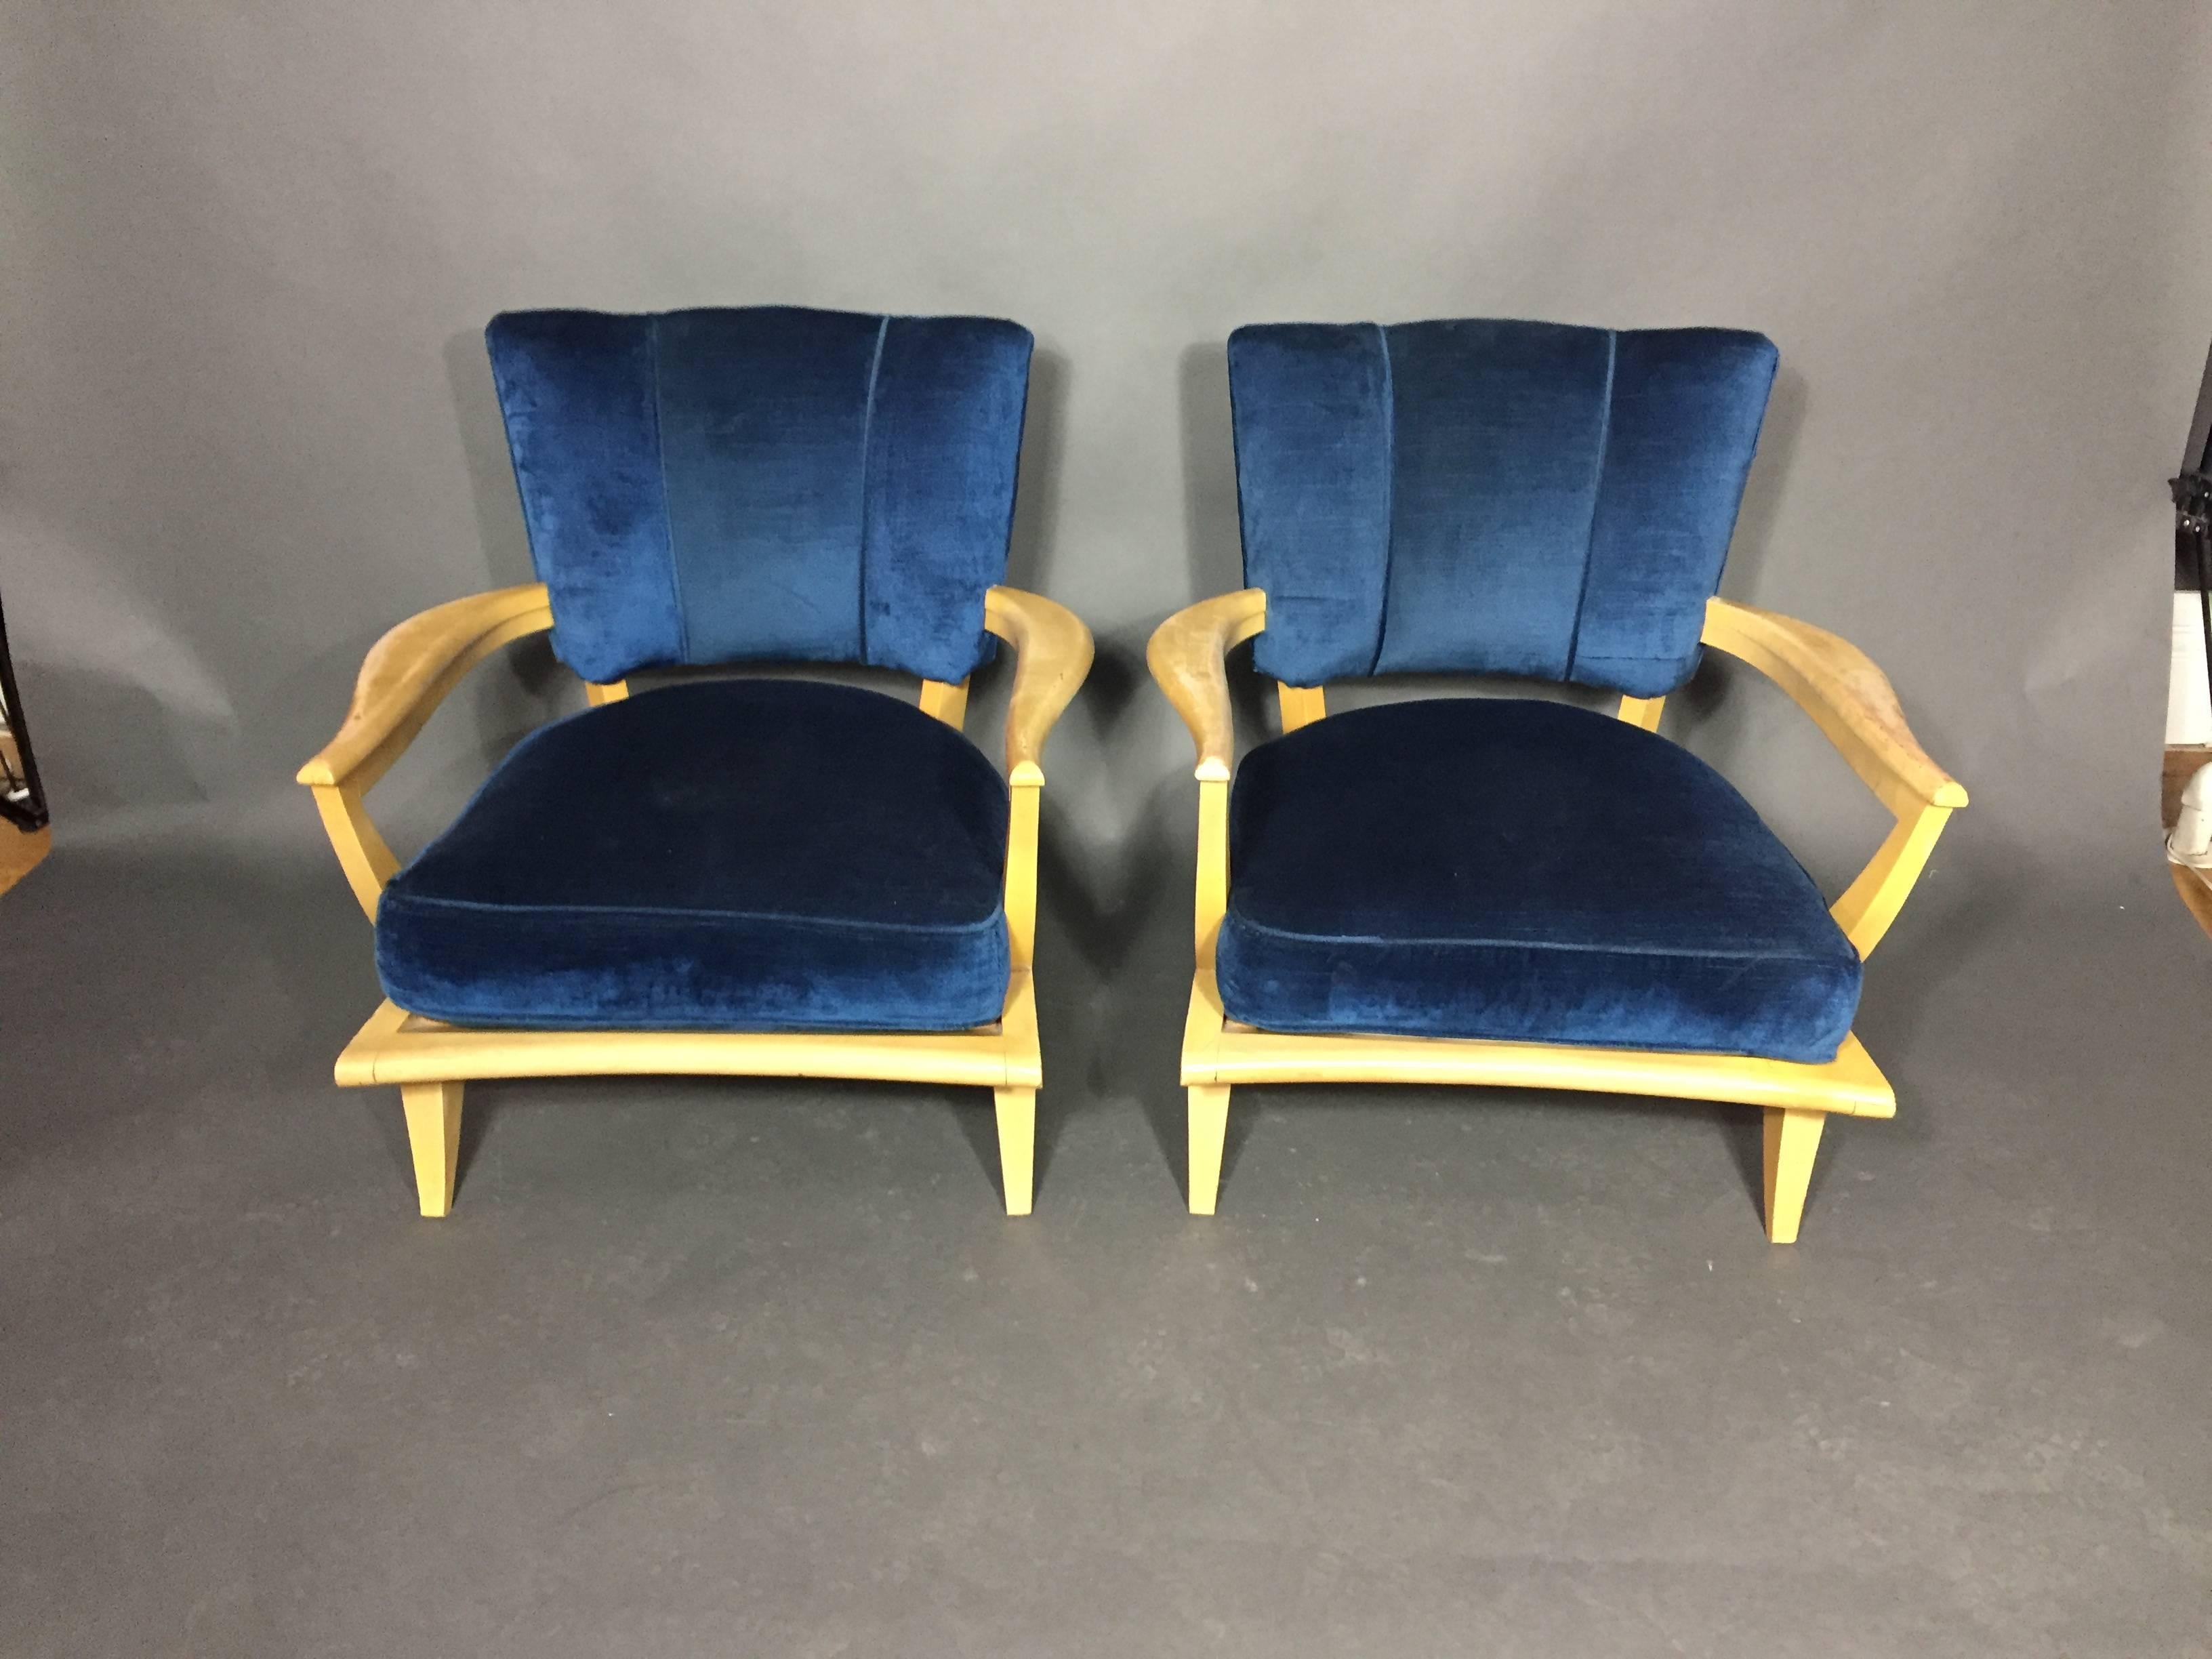 A very stylish pair of French modern lounge chairs having velvet upholstered backs and seat cushions framed by shaped arms circa 1950. Lacquered finish over mahogany frames. Some wear to finish exposing darker wood underneath great vintage feel.